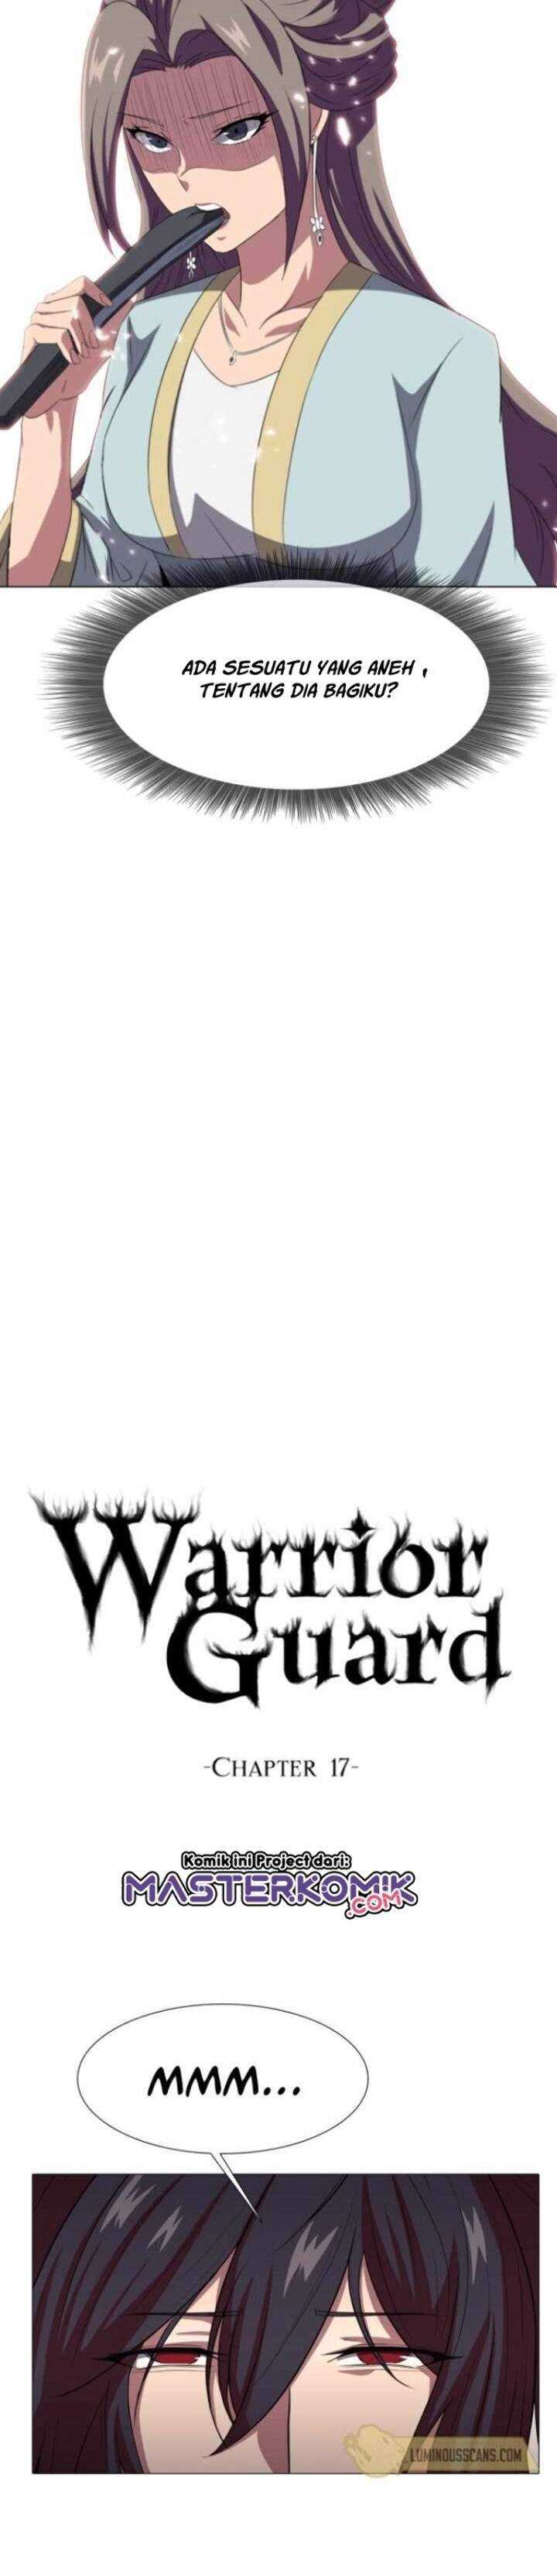 Warrior Guard Chapter 17